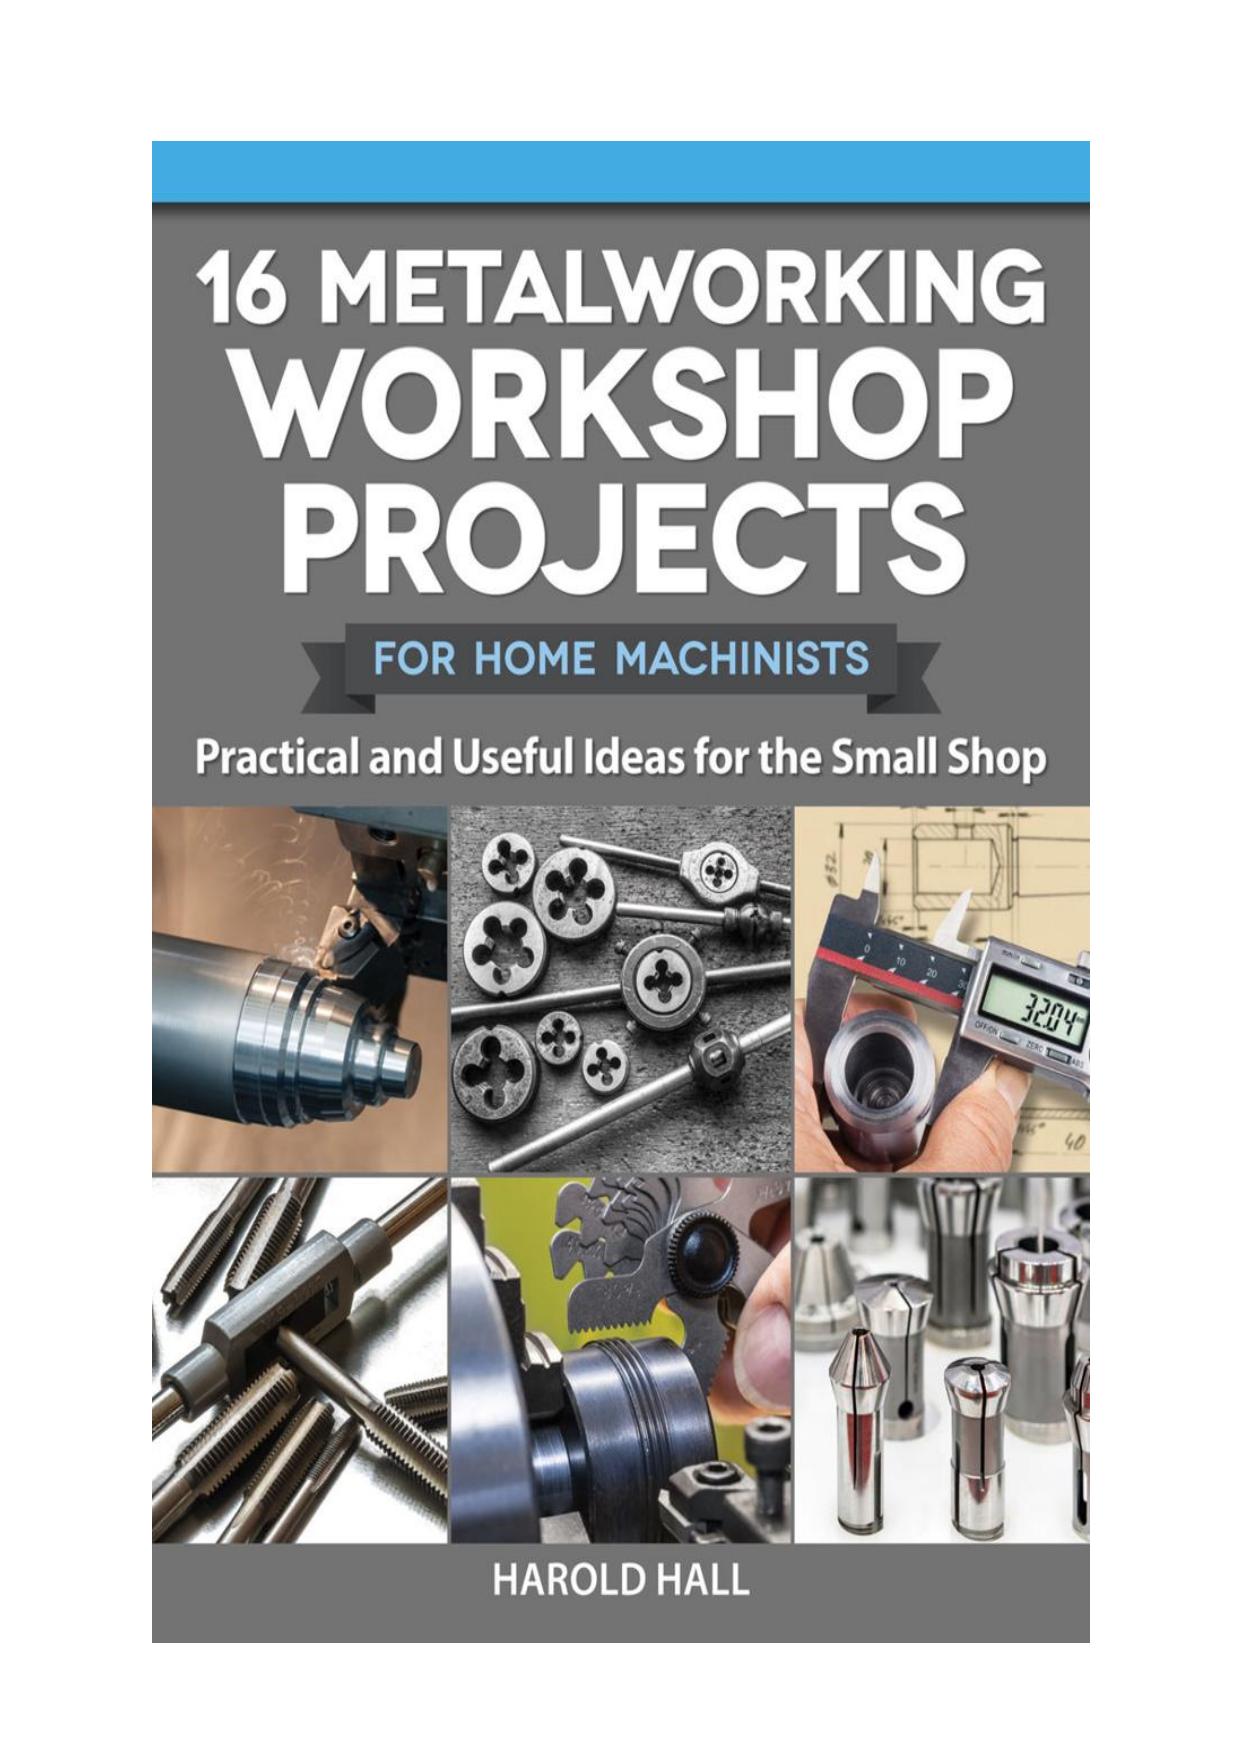 16 Metalworking Workshop Projects for Home Machinists: Practical & Useful Ideas for the Small Shop (Fox Chapel Publishing) Unique Designs - Auxiliary Workbench, Tap Holders, Lathe Backstop, and More by Harold Hall